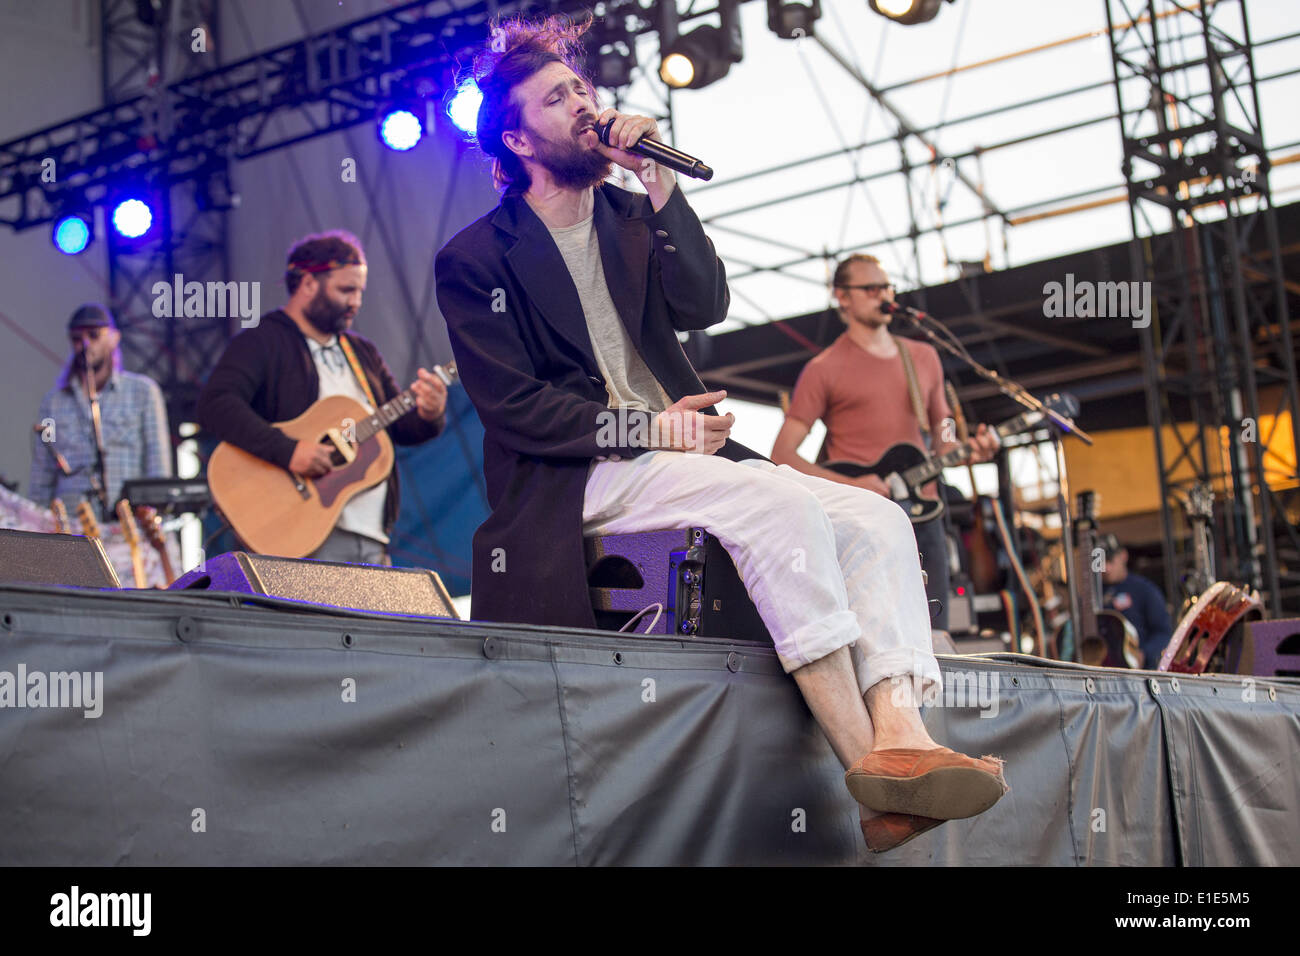 Chicago, Illinois, USA. 31st May, 2014. ALEX EBERT performs with Edward Sharpe and the Magnetic Zeros at the FirstMerit Bank Pavilion at Northerly Island in Chicago, Illinois © Daniel DeSlover/ZUMAPRESS.com/Alamy Live News Stock Photo